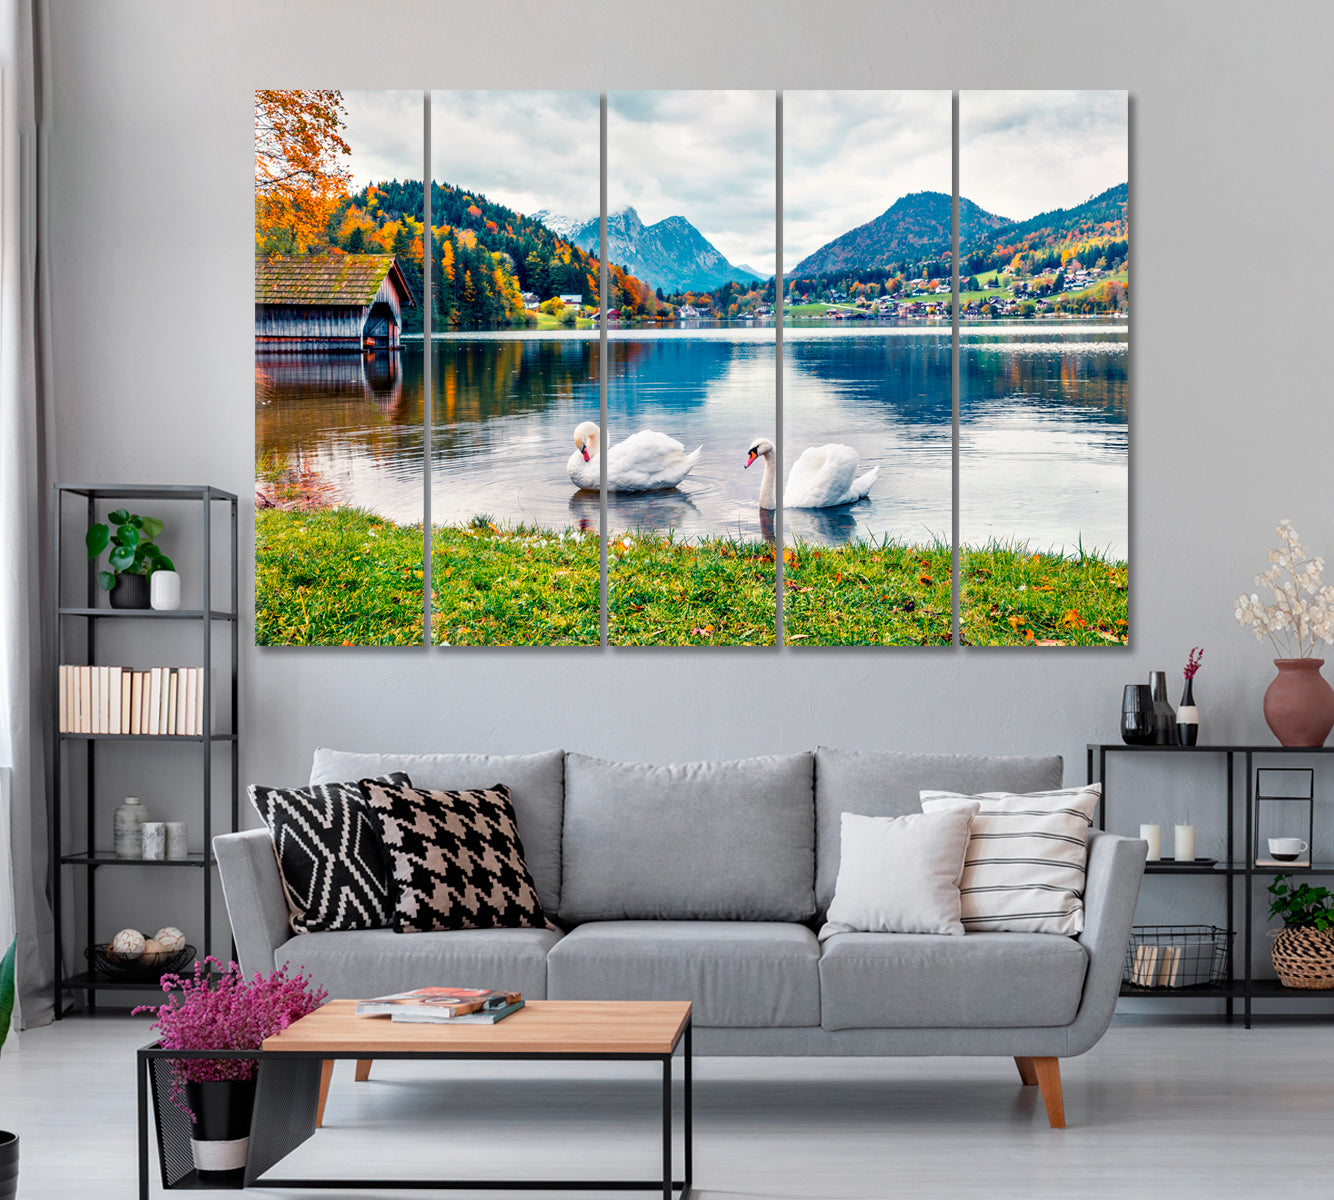 Swans on Grundlsee Lake Alps Canvas Print ArtLexy 5 Panels 36"x24" inches 